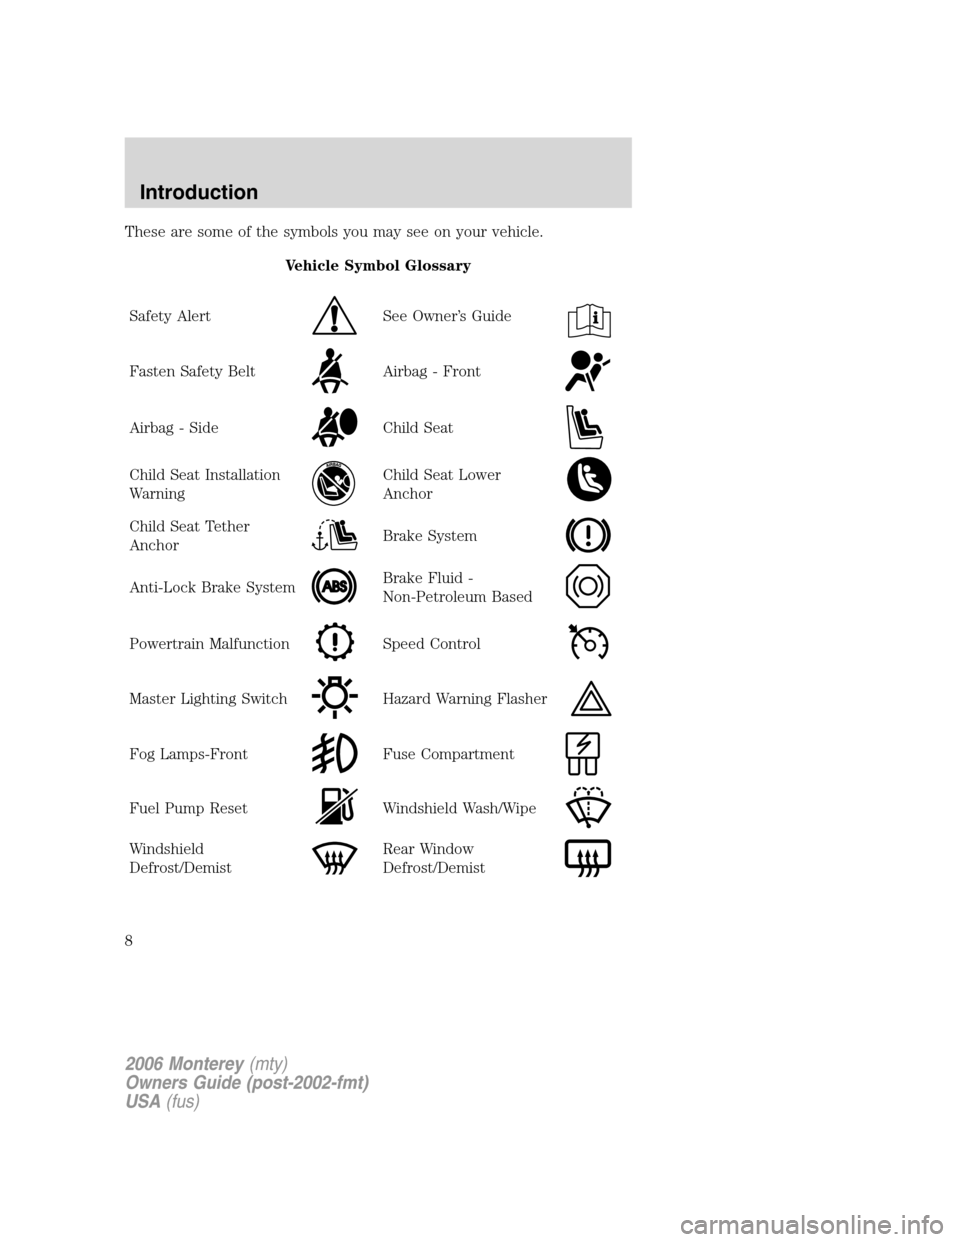 Mercury Monterey 2006  Owners Manuals These are some of the symbols you may see on your vehicle.
Vehicle Symbol Glossary
Safety Alert
See Owner’s Guide
Fasten Safety BeltAirbag - Front
Airbag - SideChild Seat
Child Seat Installation
War